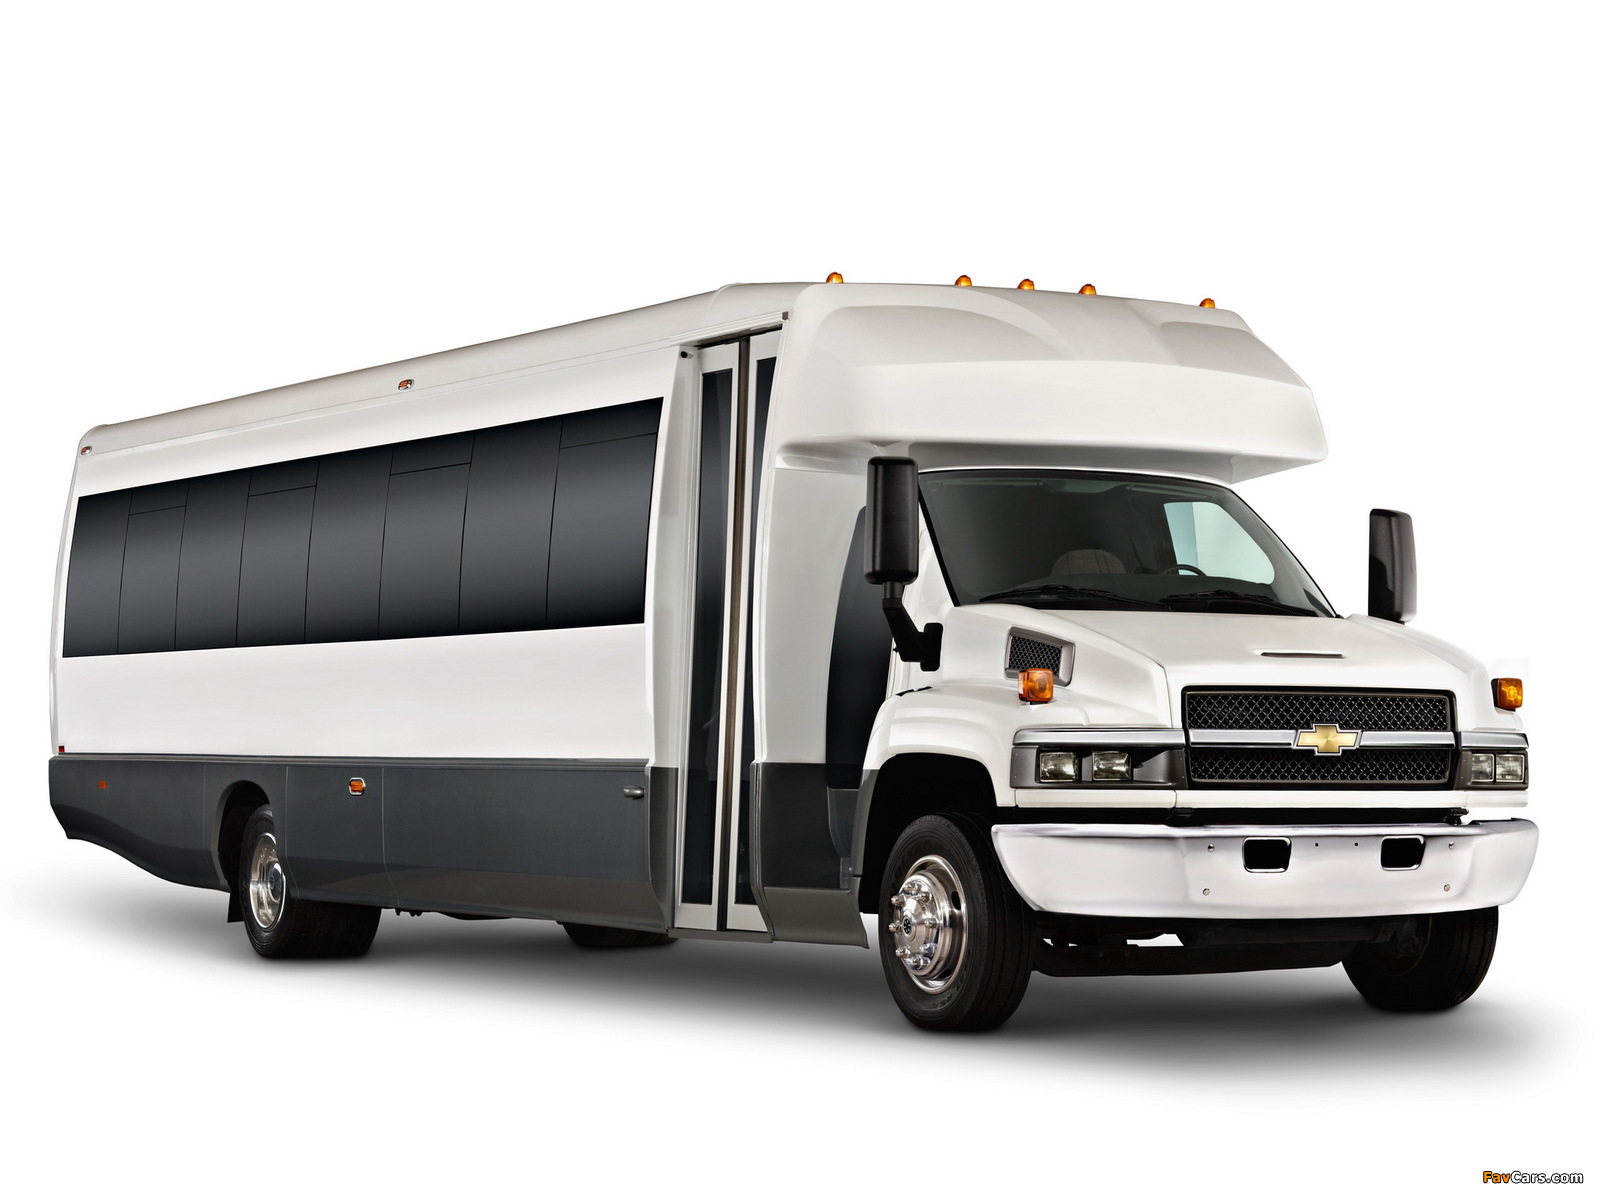 Chevrolet Express C4500 Cutaway Shuttle Bus 2010 pictures (1600 x 1200)